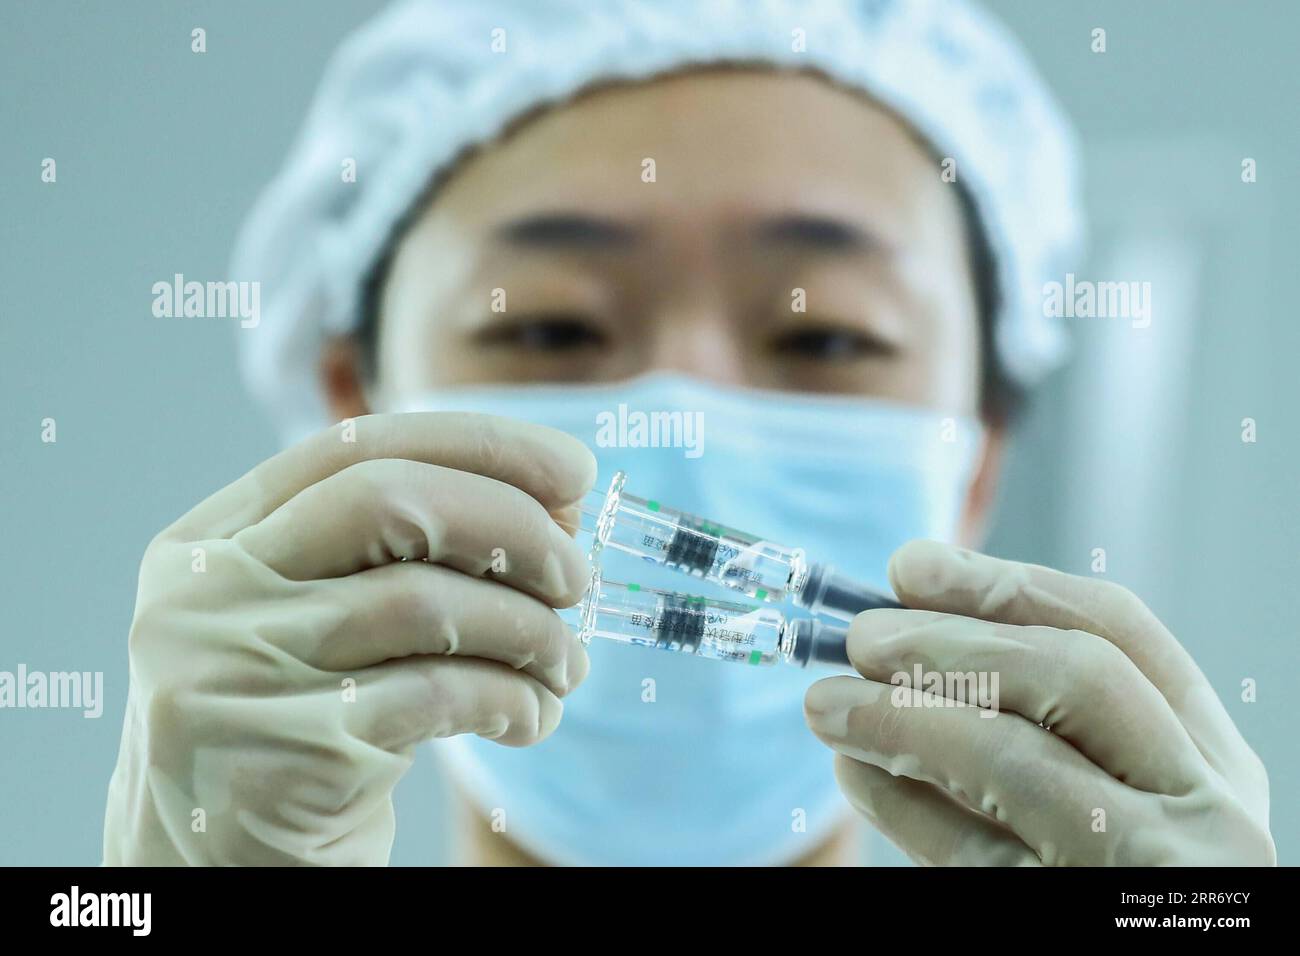 210305 -- BEIJING, March 5, 2021 -- A staff member checks the packaging quality of COVID-19 inactivated vaccine products at a packaging plant of the Beijing Biological Products Institute Co., Ltd. in Beijing, capital of China, Dec. 25, 2020.  Xinhua Headlines: China targets GDP growth of over 6 pct in 2021, revs up modernization drive ZhangxYuwei PUBLICATIONxNOTxINxCHN Stock Photo